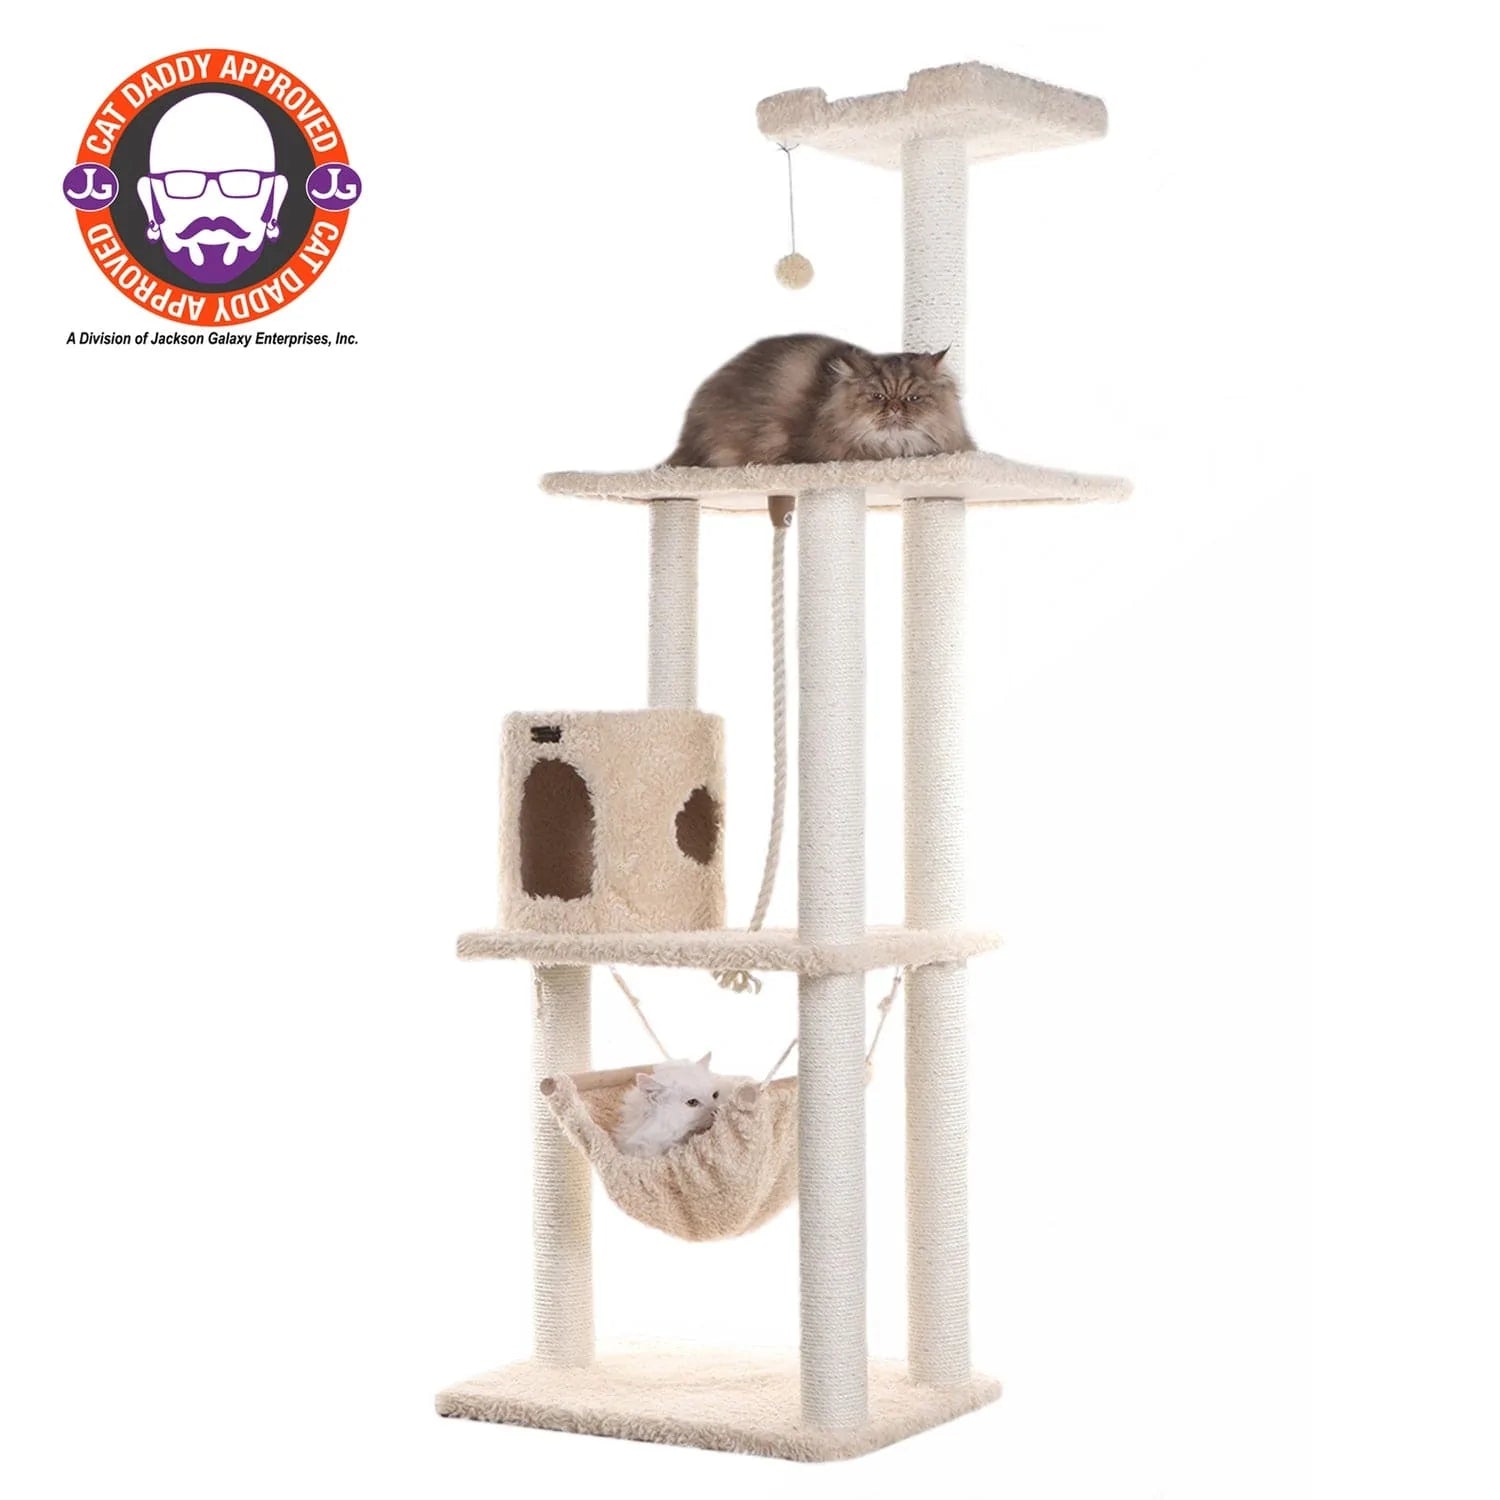 Armarkat 70-In Real Wood Cat Furniture,Ultra Thick Faux Fur Covered Cat Condo House A7005, Beige